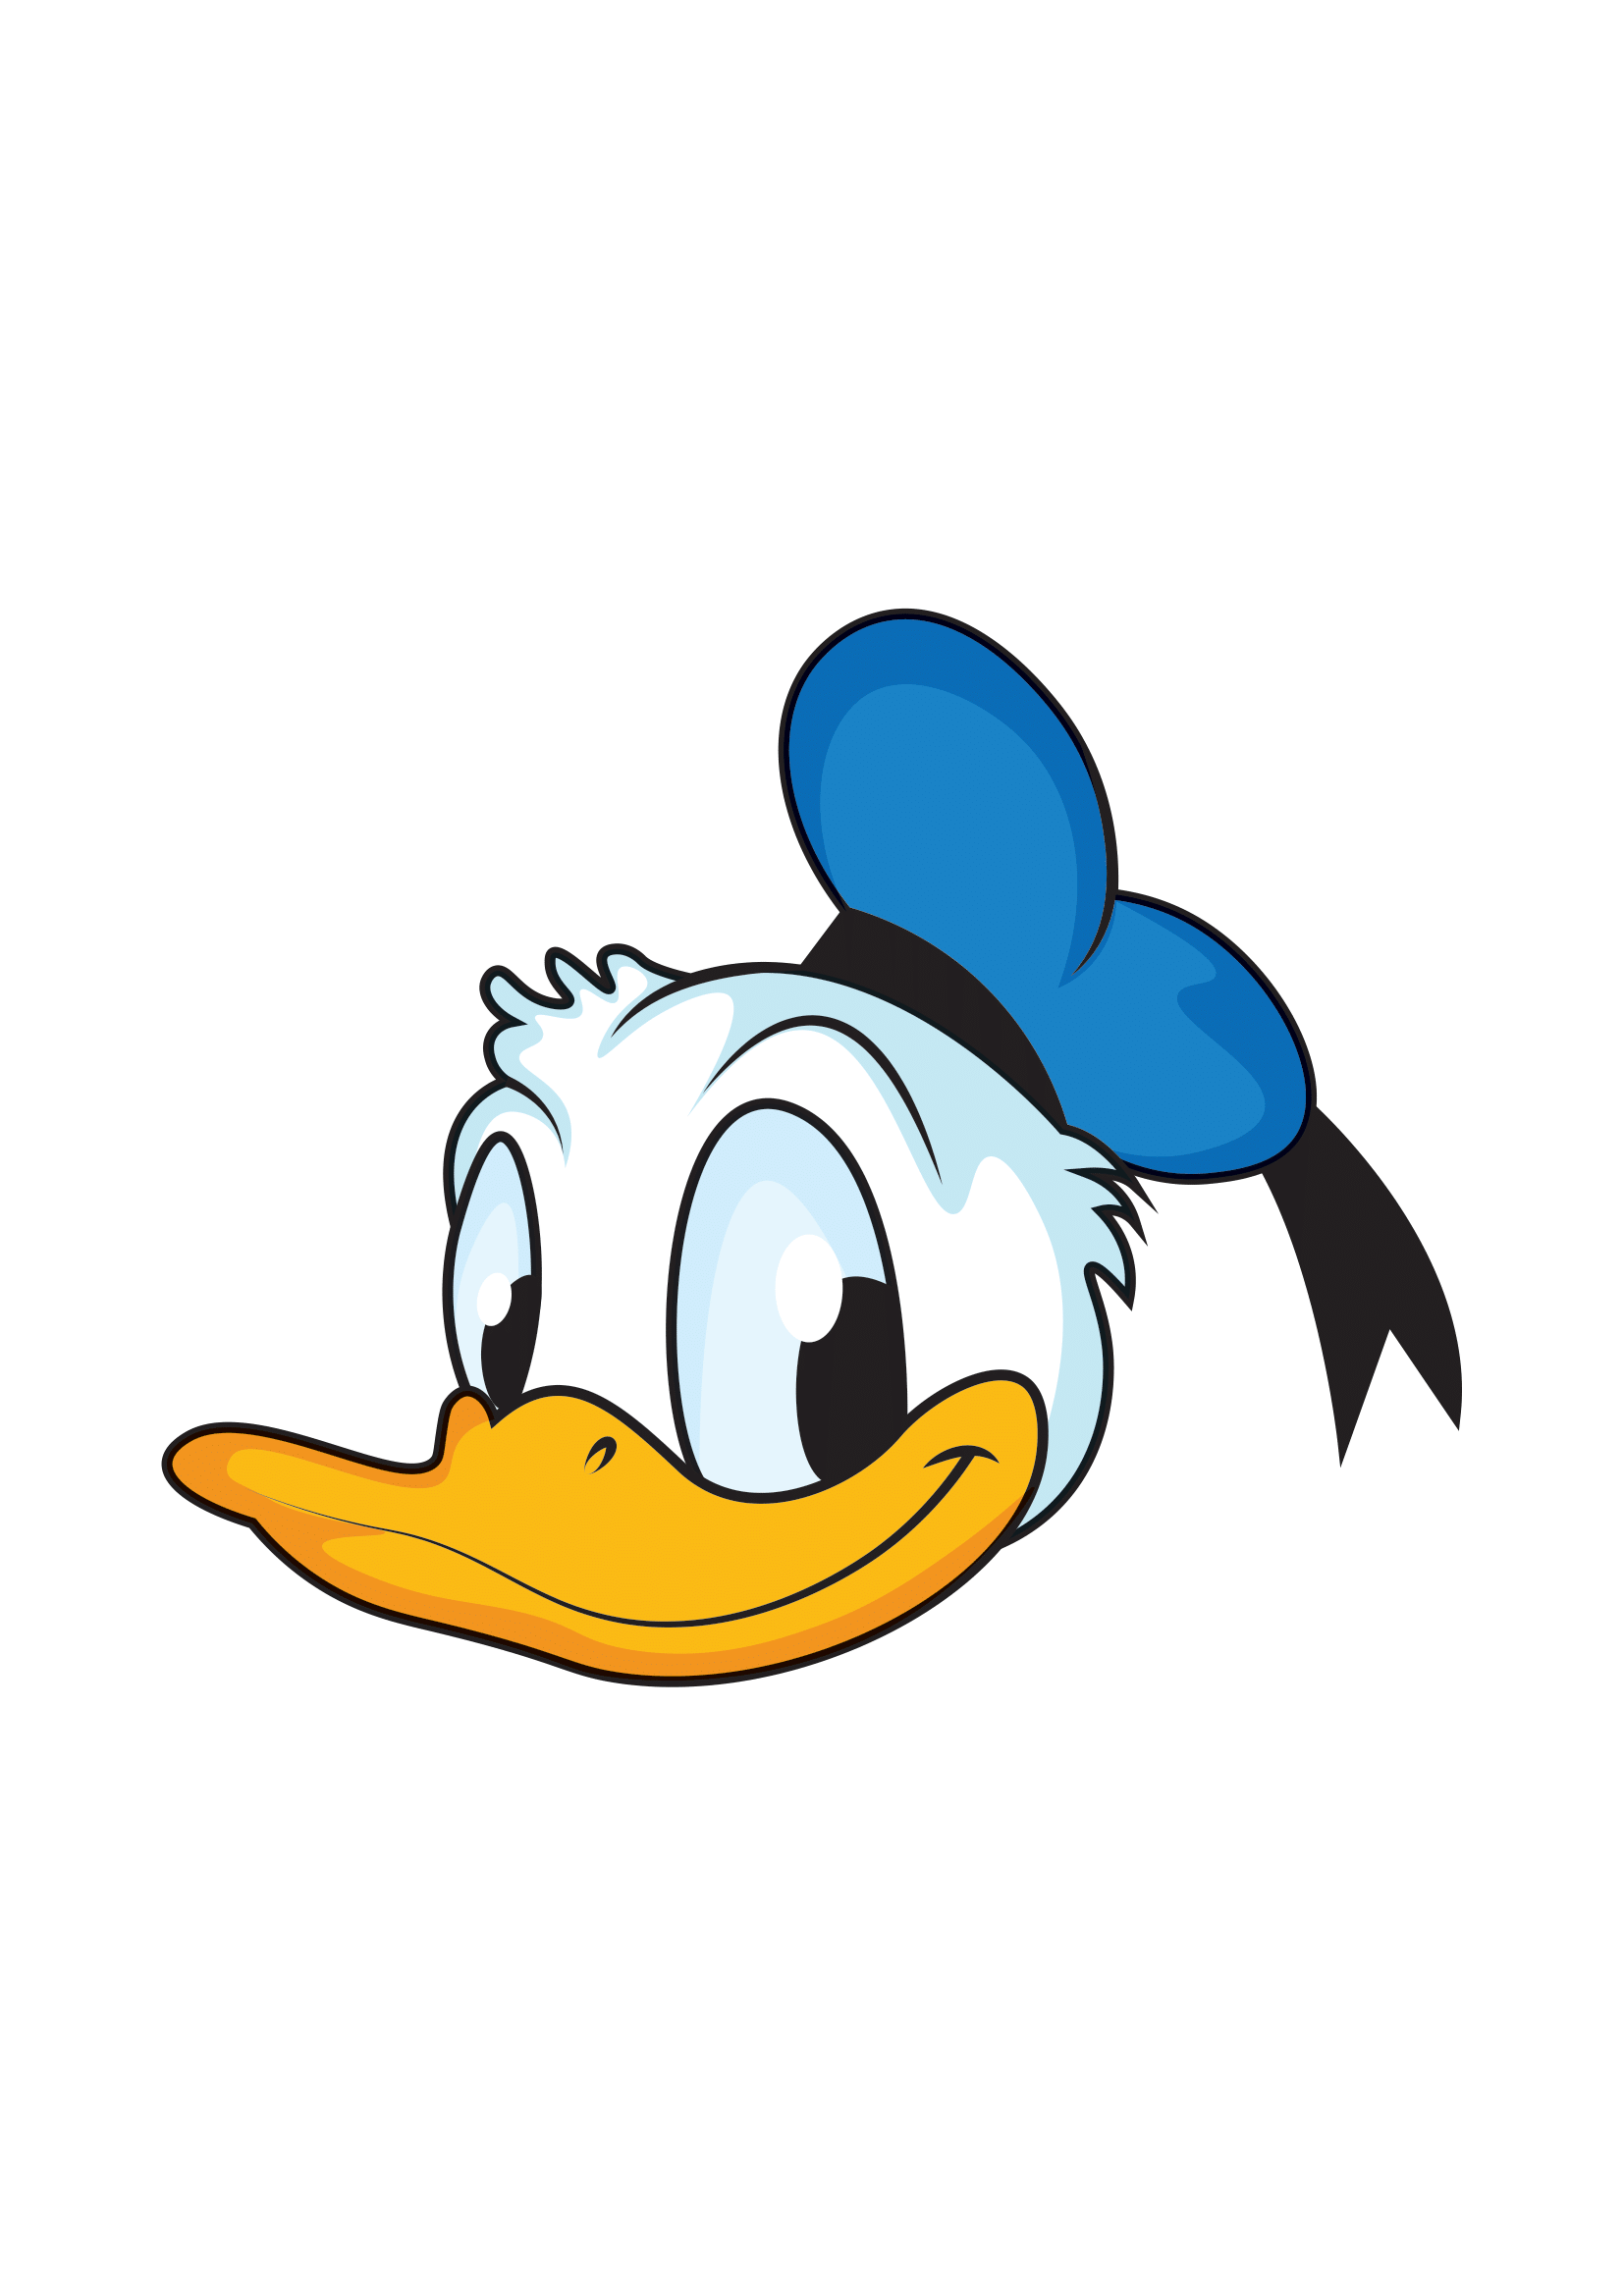 How to Draw Donald Duck Face Step by Step Printable